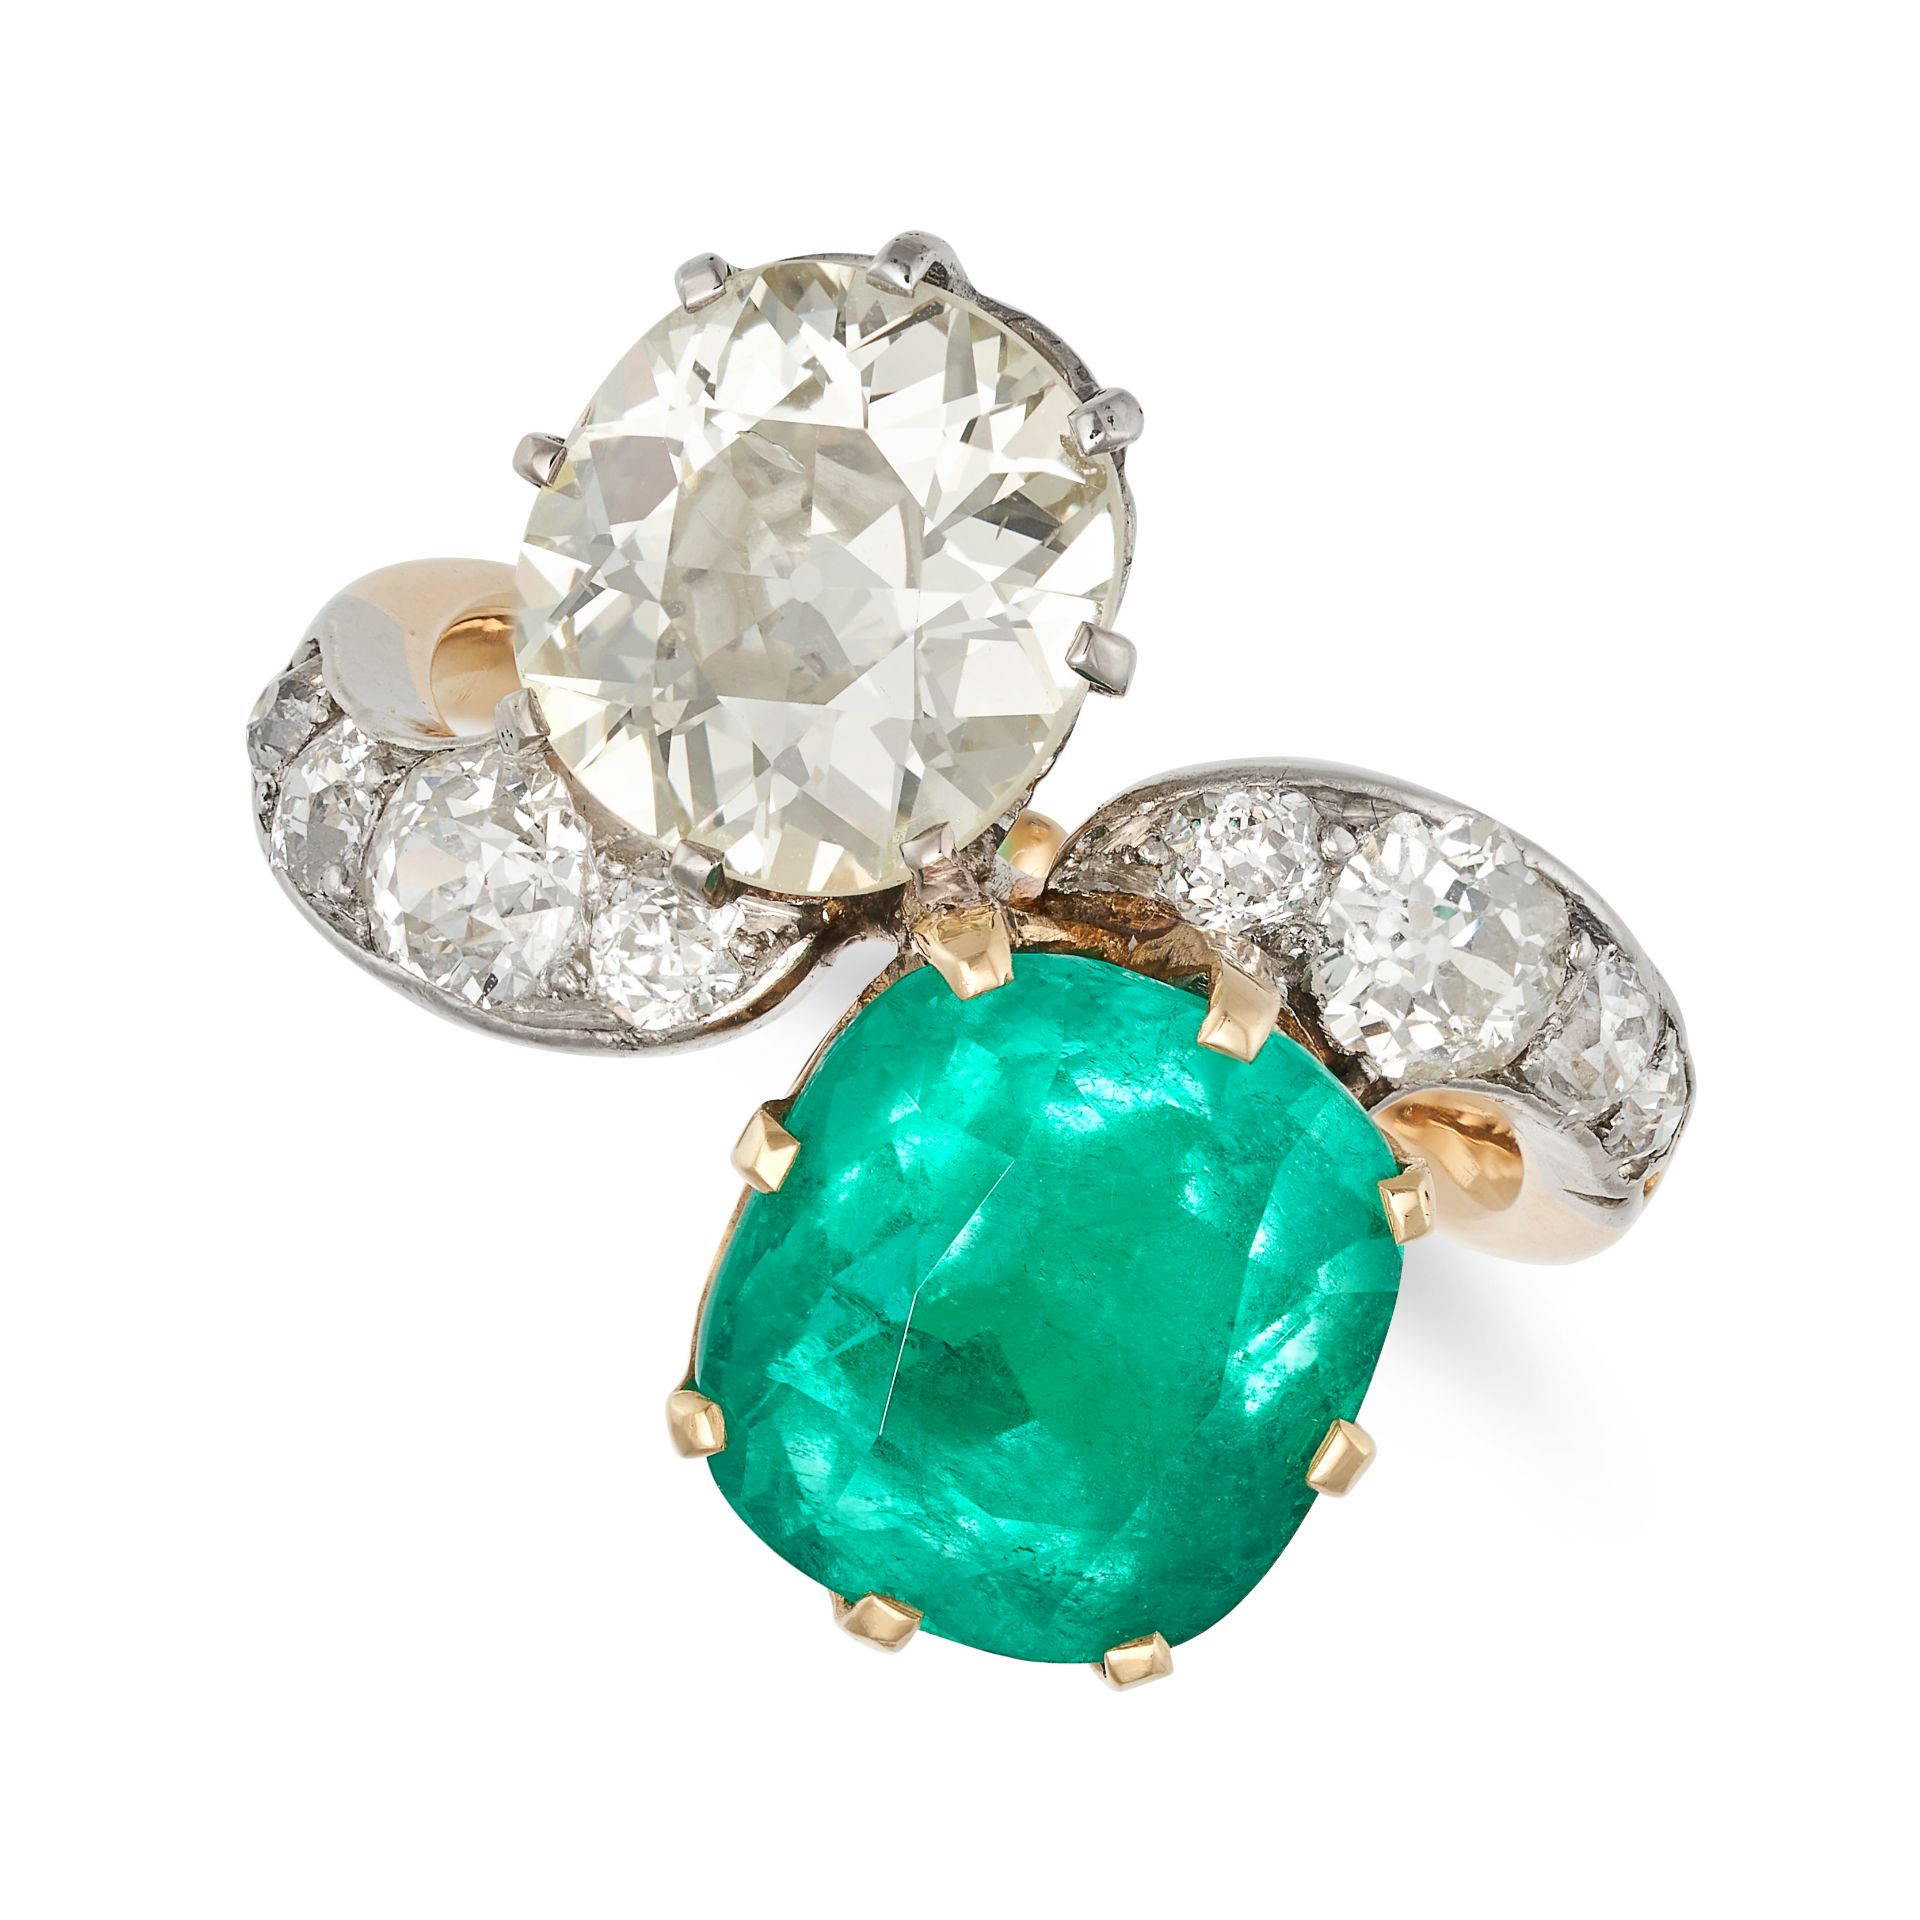 AN ANTIQUE EDWARDIAN COLOMBIAN EMERALD AND DIAMOND TOI ET MOI RING in yellow gold, set with a cus...